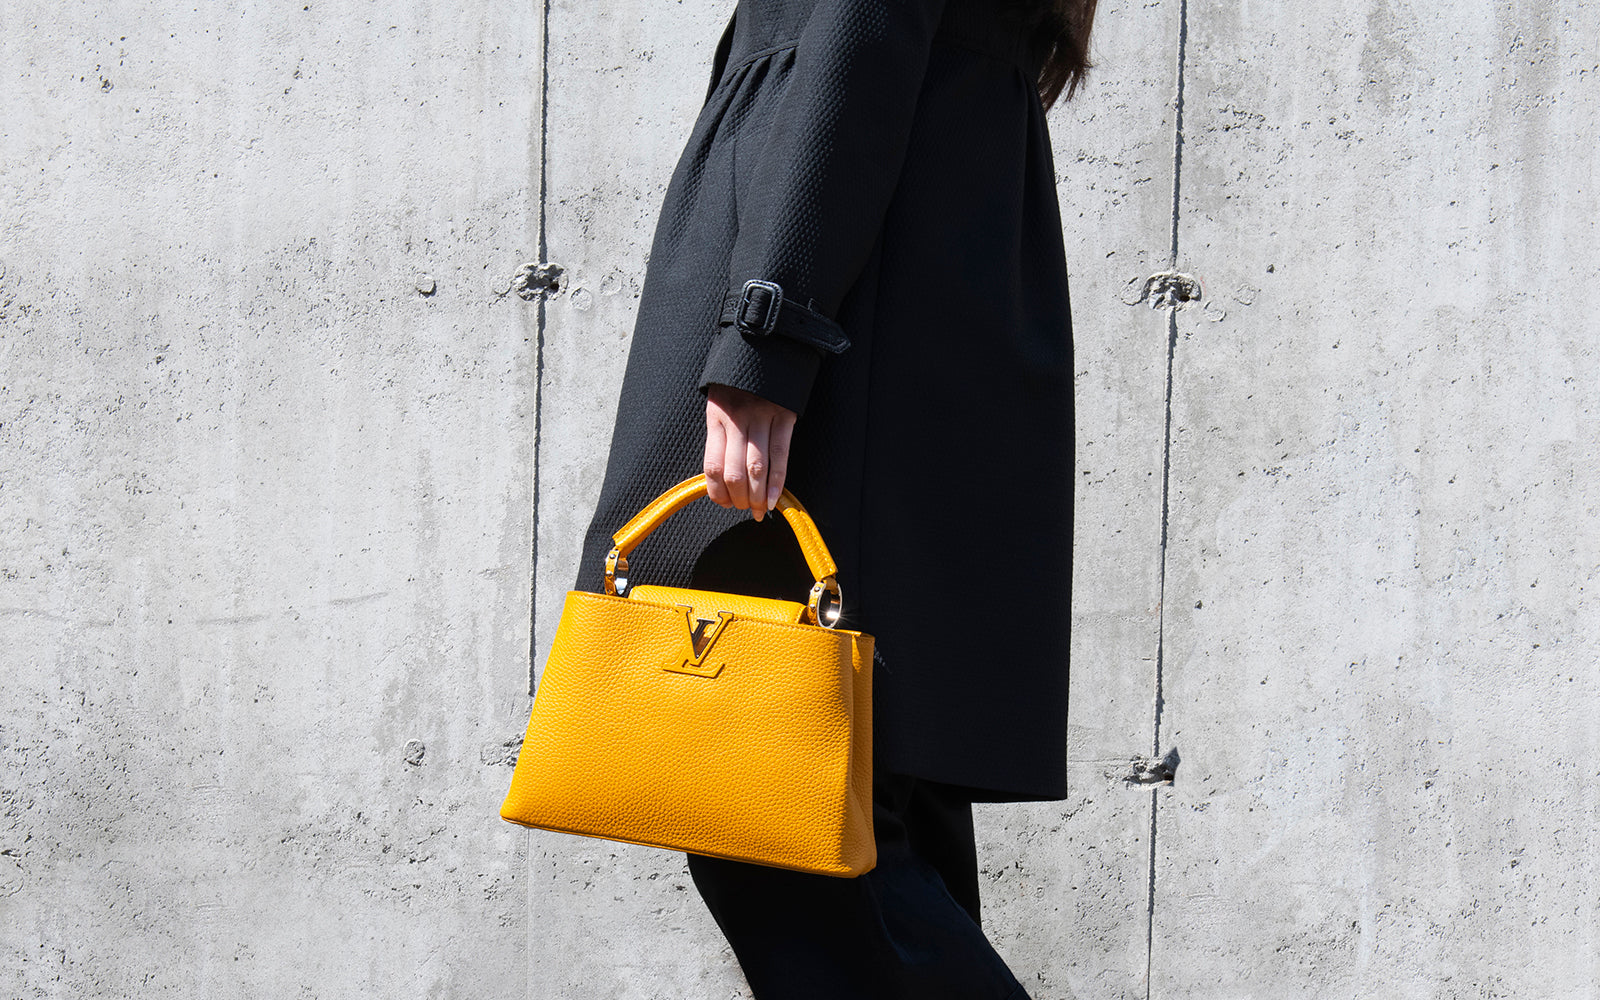 RFID Technology Expands in Designer Fashion - Shop Authentic Handbags